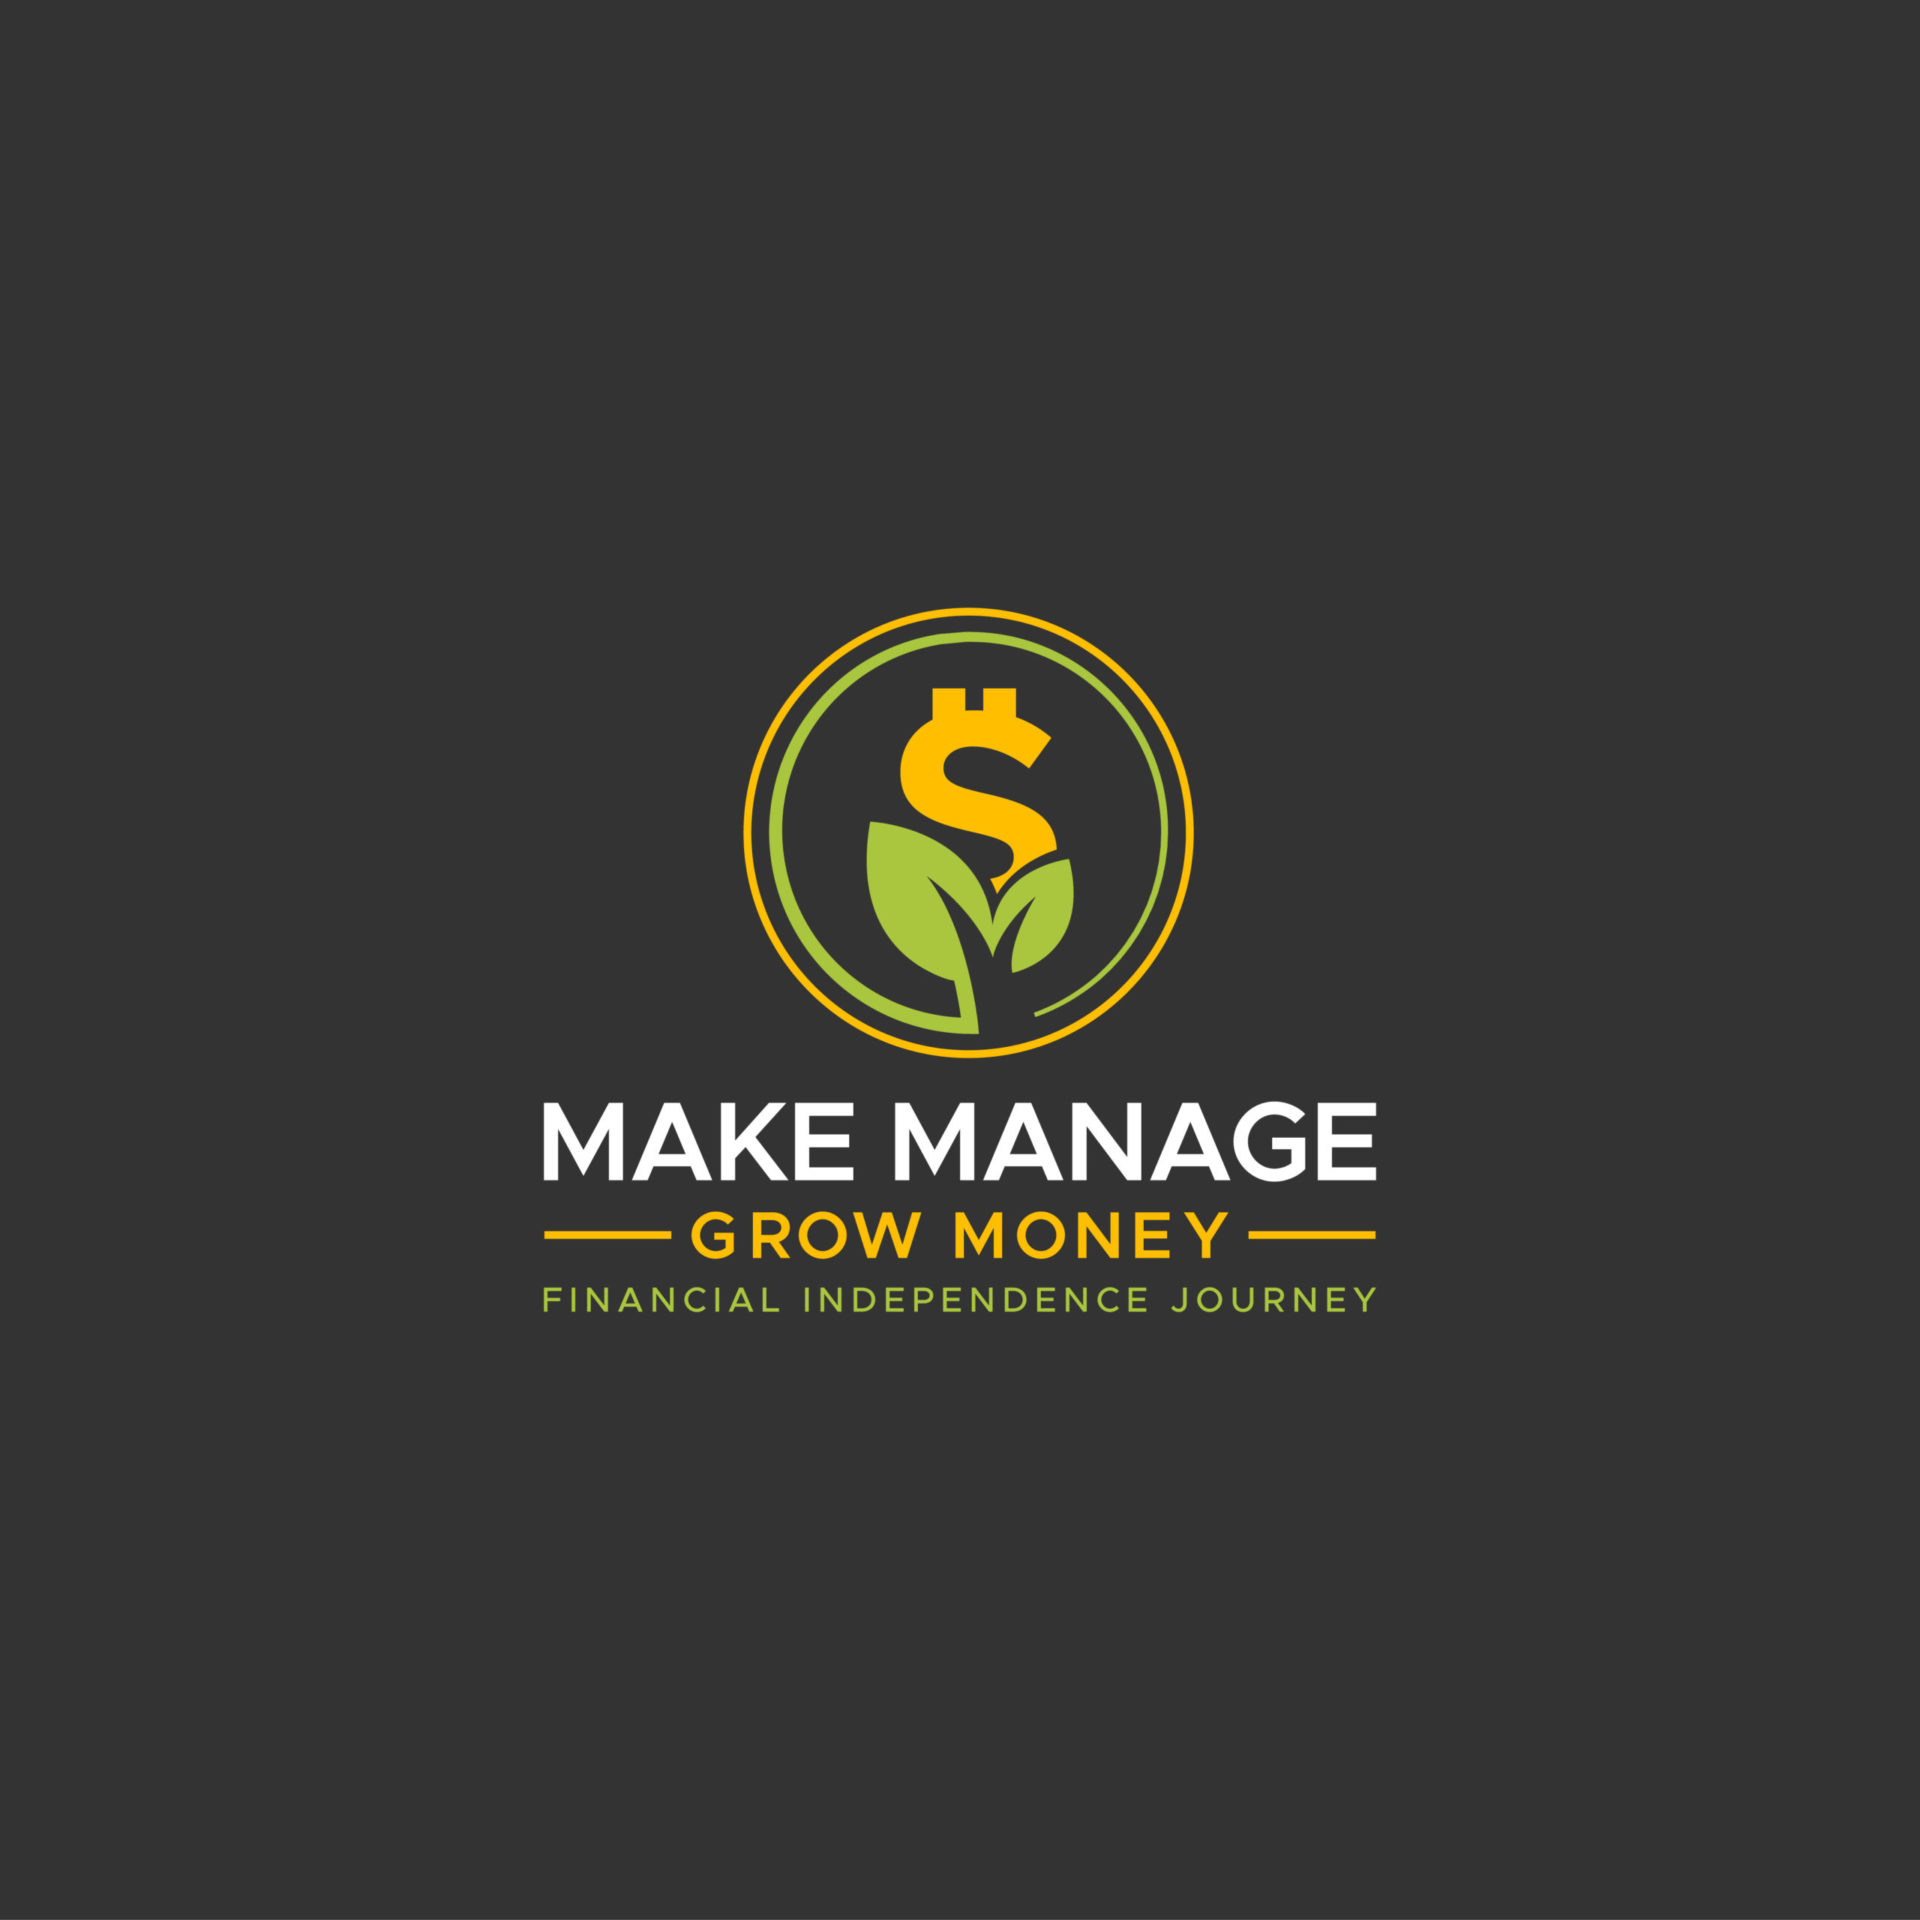 Make Manage Grow Money Self Employed Personal Finance Blog and Business Development Consultant and Coach Adam Ace Spencer